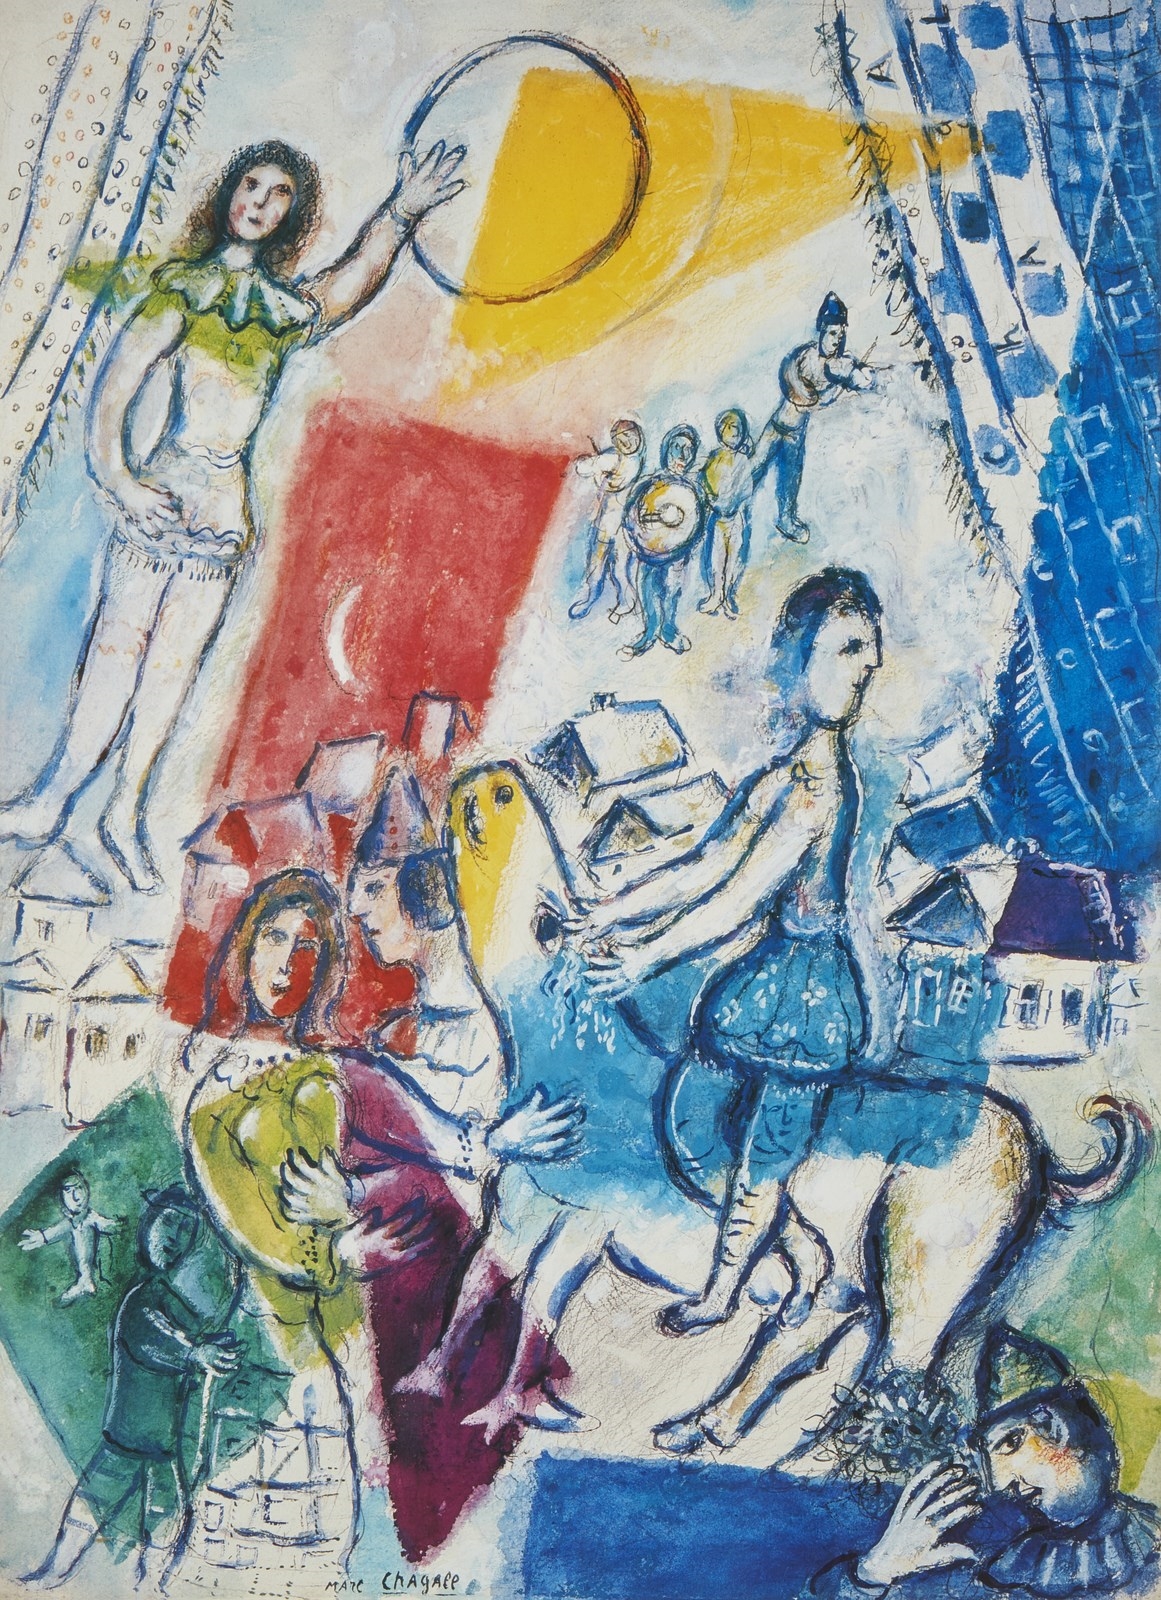 Joie du Cirque by Marc Chagall